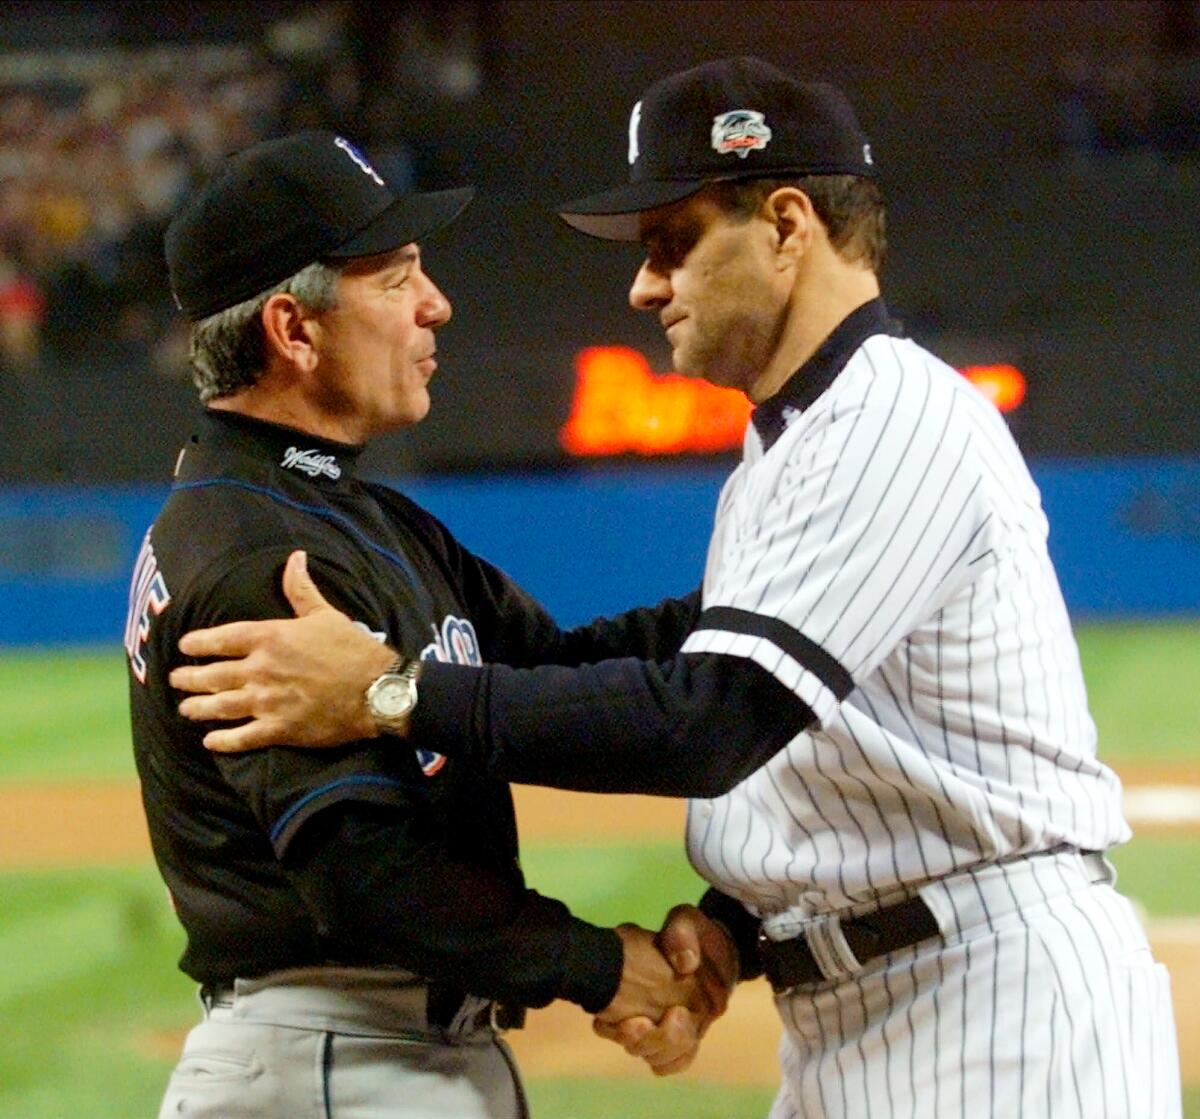 FILE - In this Oct. 21, 2000, file photo, New York Yankees manager Joe Torre, right, greets New York Mets manager Bobby Valentine before the start of Game 1 of baseball's World Series at Yankee Stadium in New York. Sports teams will hold ceremonies Saturday, Sept. 11, 2021, to mark the 20th anniversary of the Sept. 11 terrorist attacks. Valentine, manager of the 2001 Mets, will throw a ceremonial first pitch to Torre, manager of the 2001 Yankees. (AP Photo/Mark Lennihan, Pool, File)